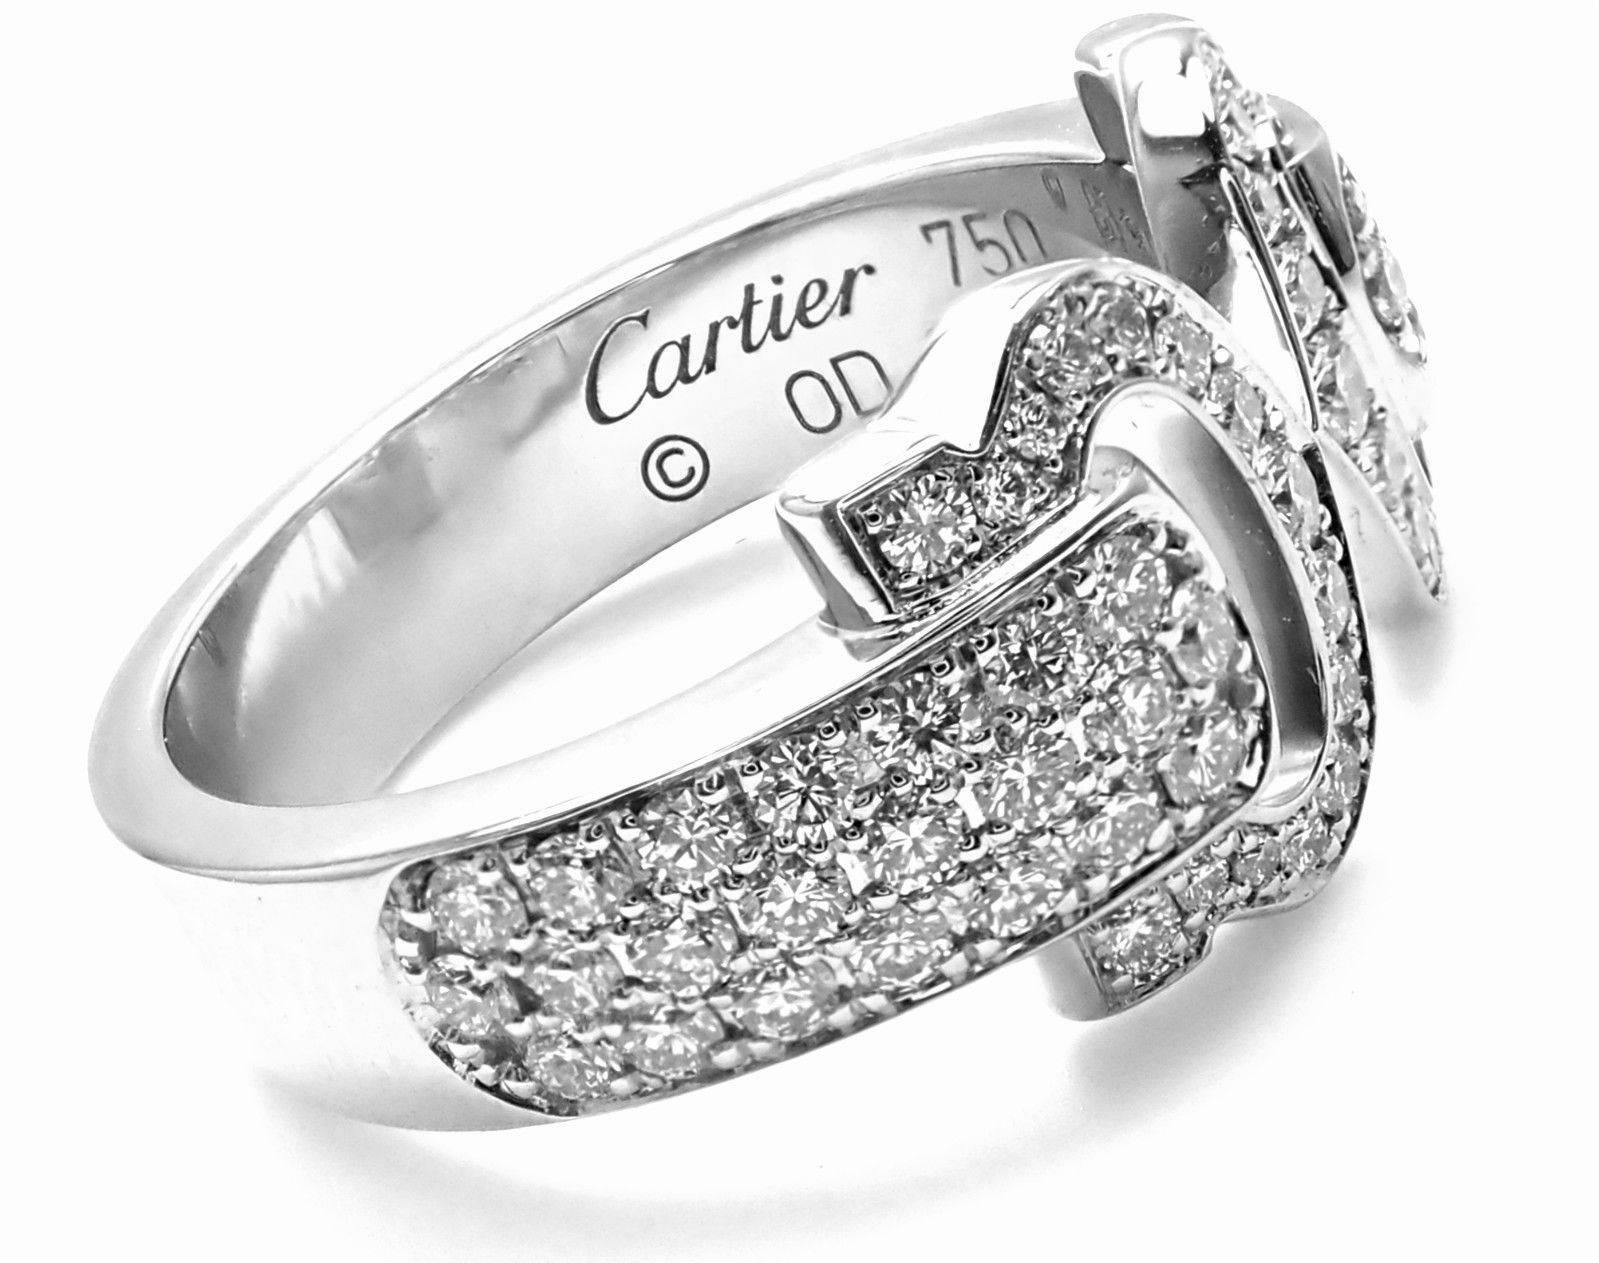 18k White Gold Diamond Double C Band Ring by Cartier. 
With Round brilliant cut diamonds VVS1 clarity, E color total weight approx. 1.20ct
This ring comes with original Cartier box and Cartier certificate.
Details: 
Ring Size: European 53, US 6